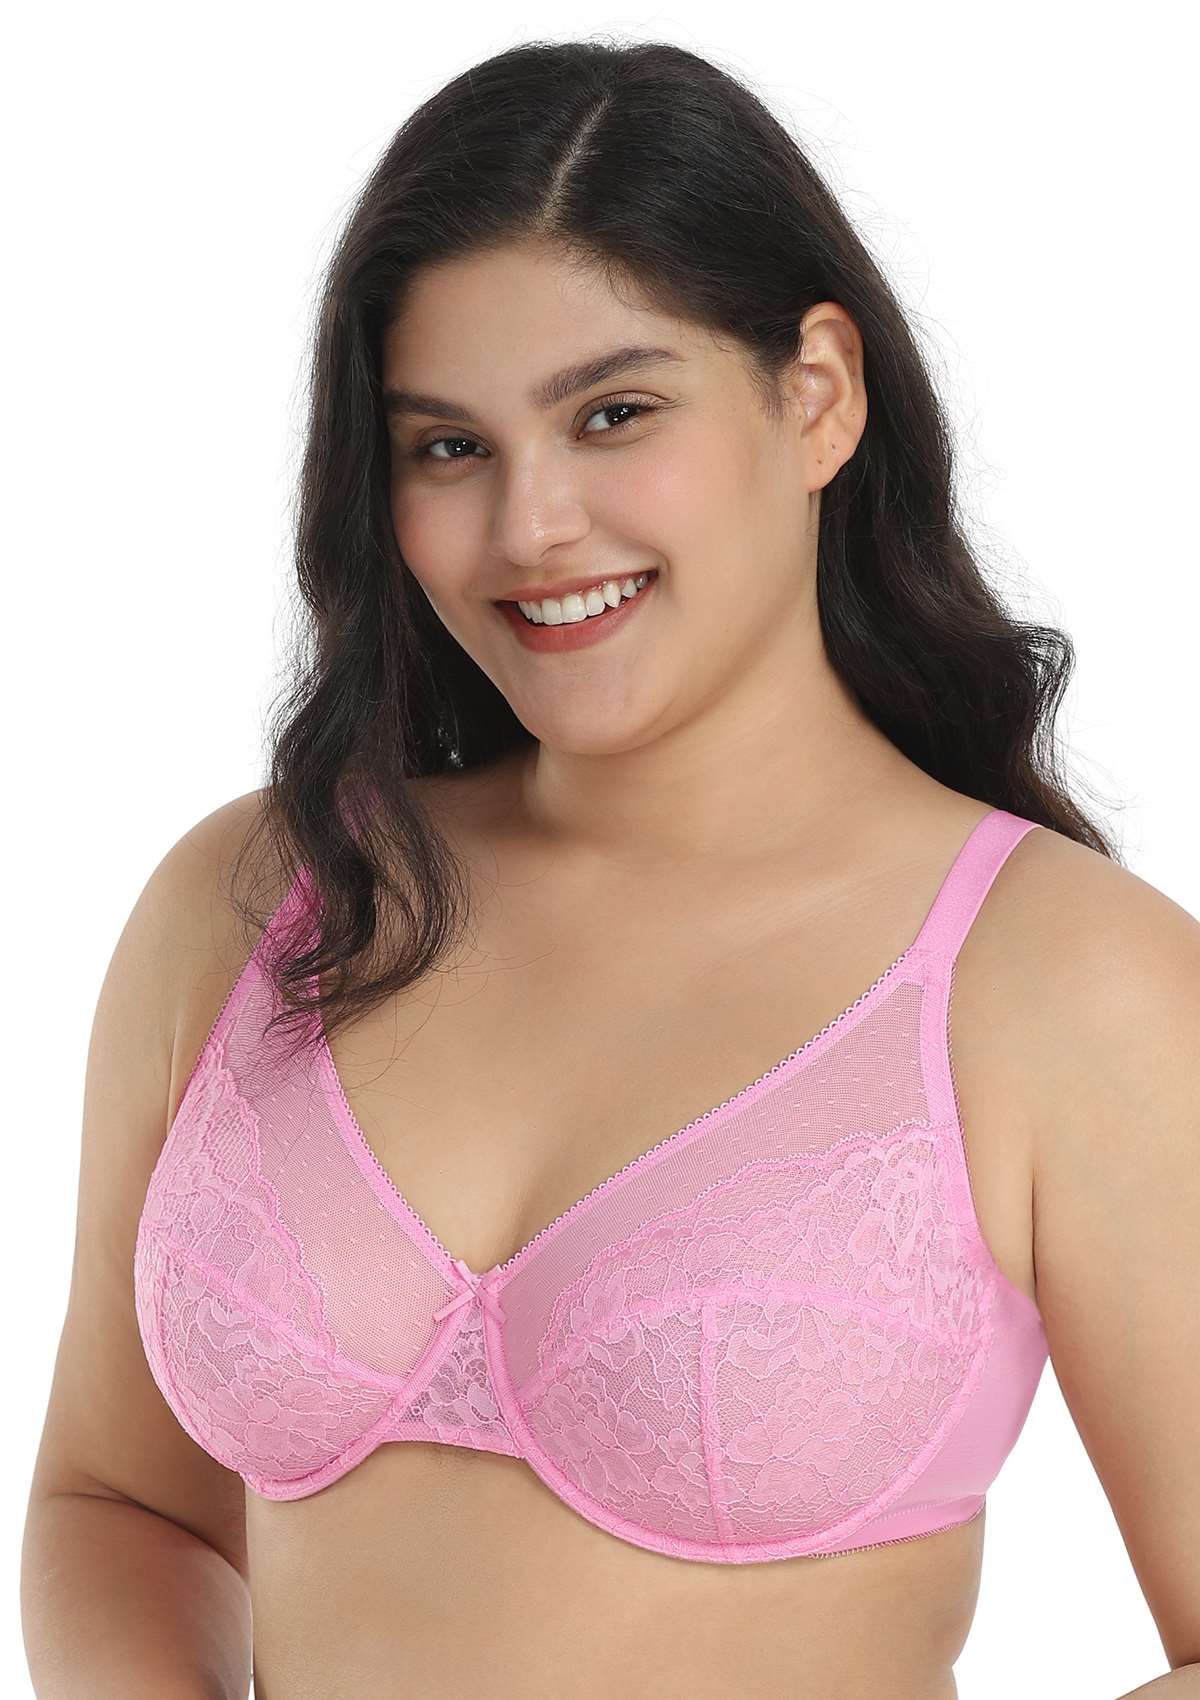 HSIA Enchante Lacy Bra: Comfy Sheer Lace Bra With Lift - Pink / 46 / DD/E